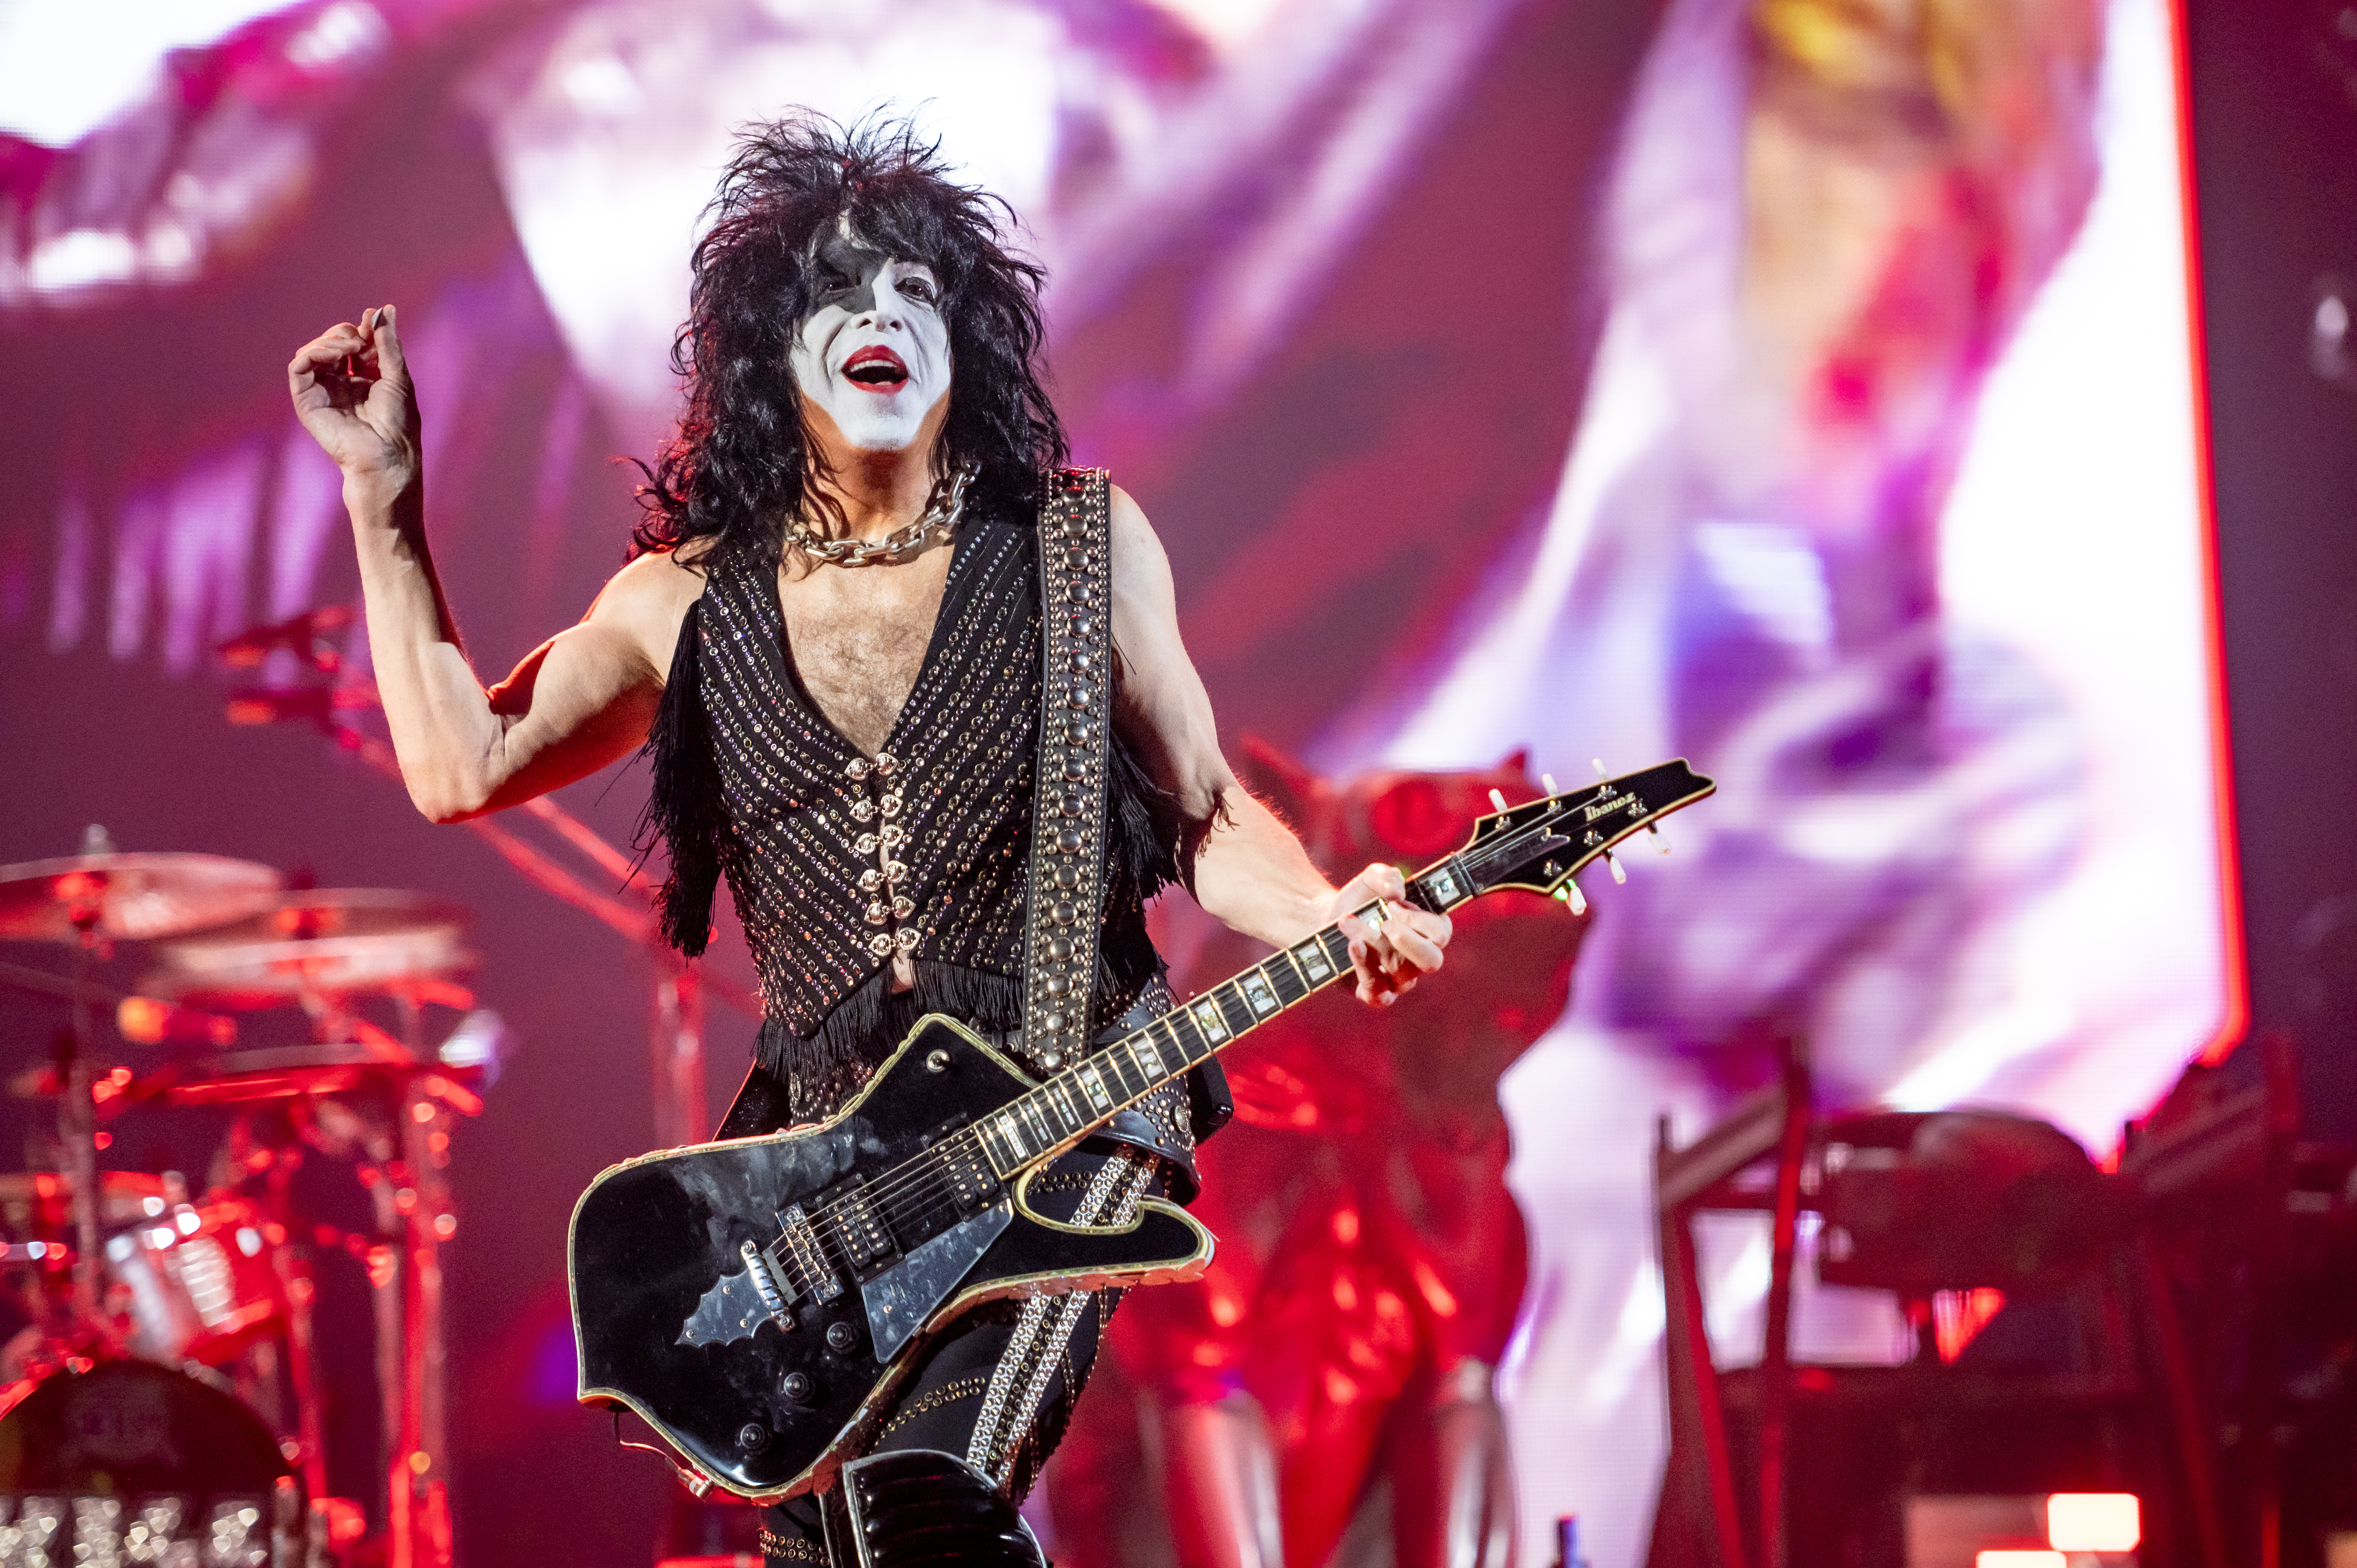 Paul Stanley KISS performs at Arena di Verona on July 11, 2022 in Verona, Italy | Source: Getty Images